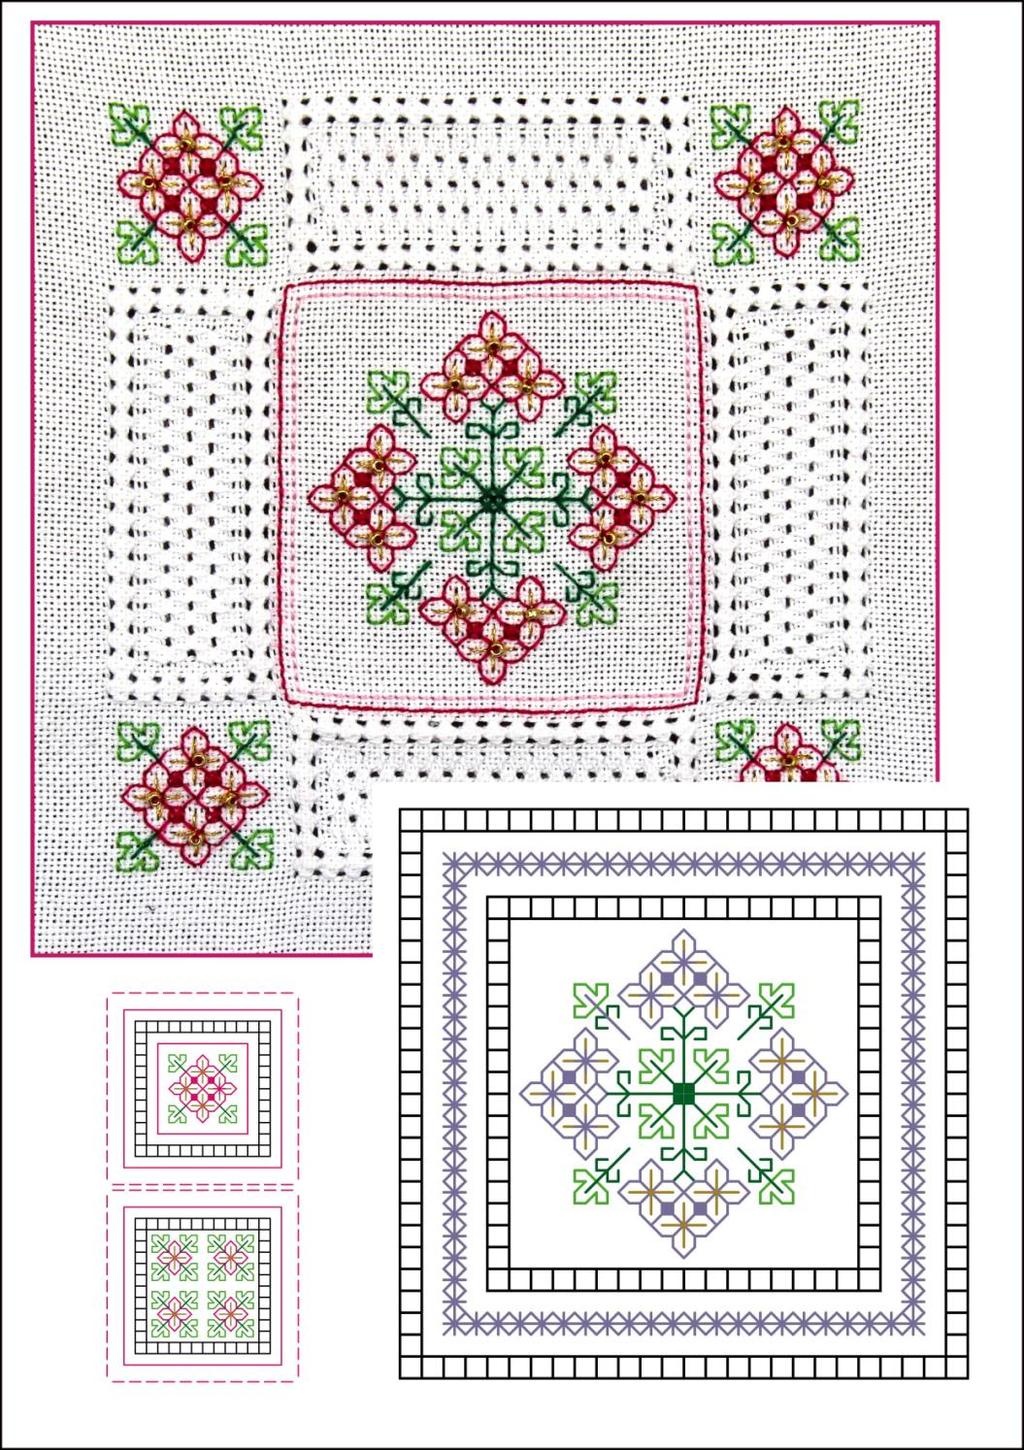 Rebekah introduces the reader to two pulled work stitches and traditional cross stitch, back stitch and eyelet stitch in two variations.